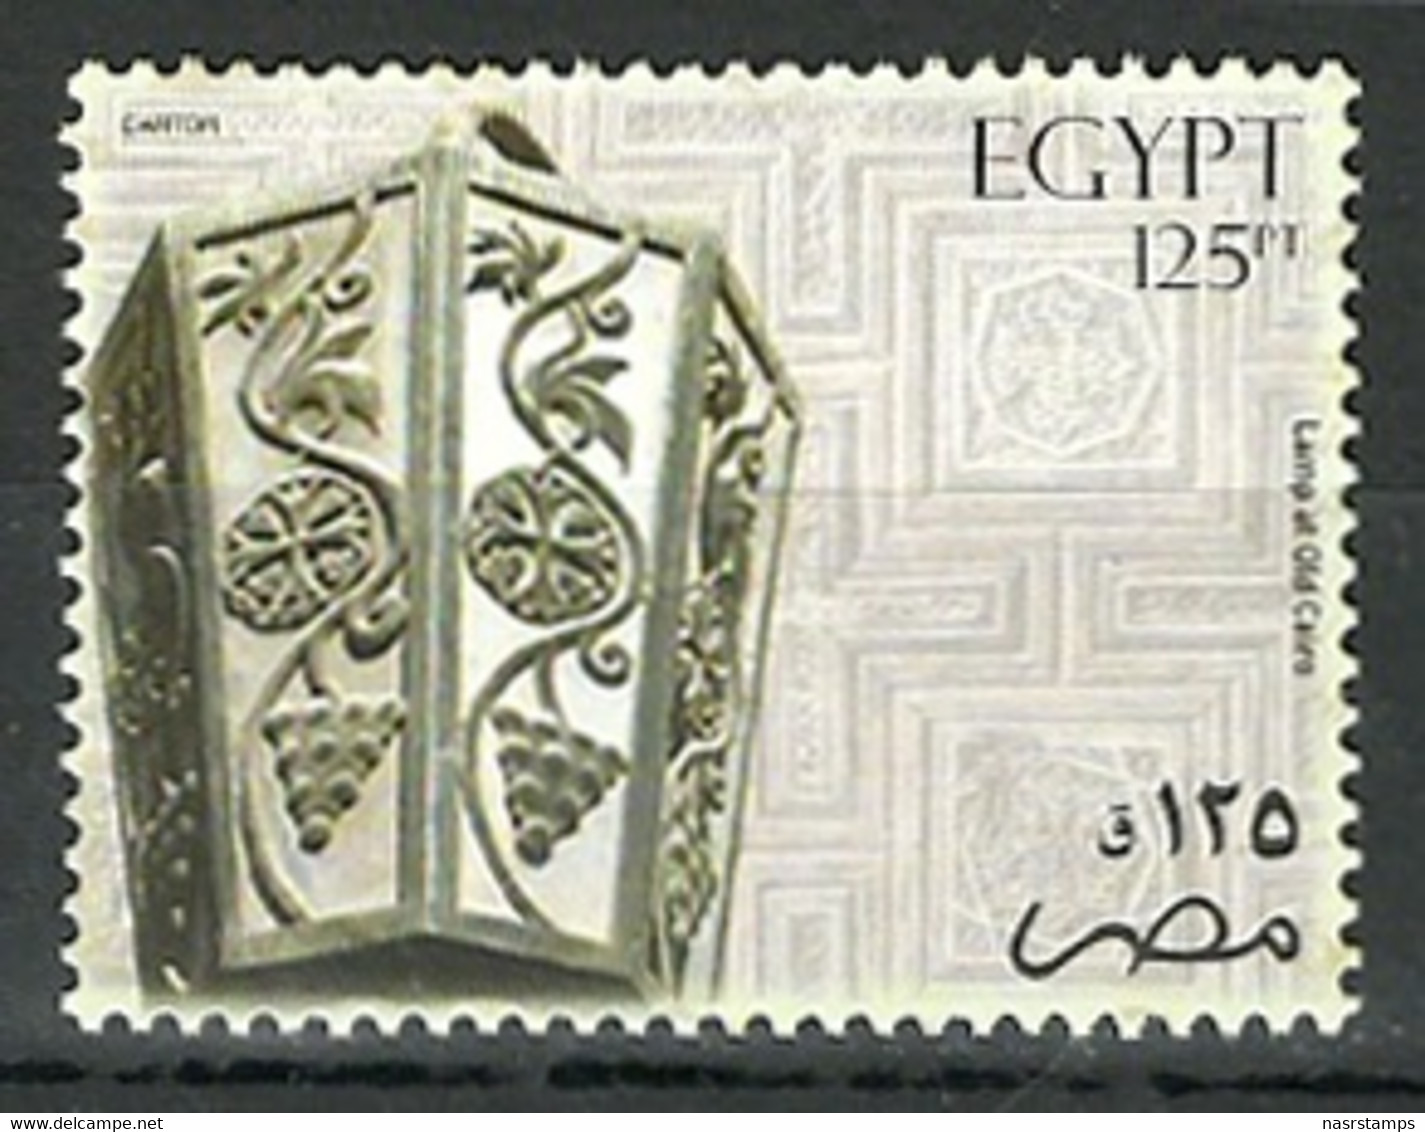 Egypt - 2004 - ( Treasures Of Egypt Booklet ) - Pharaohs - C.V. 50 US$ -- 22 Pages Include The Gold Stamps - Egyptology